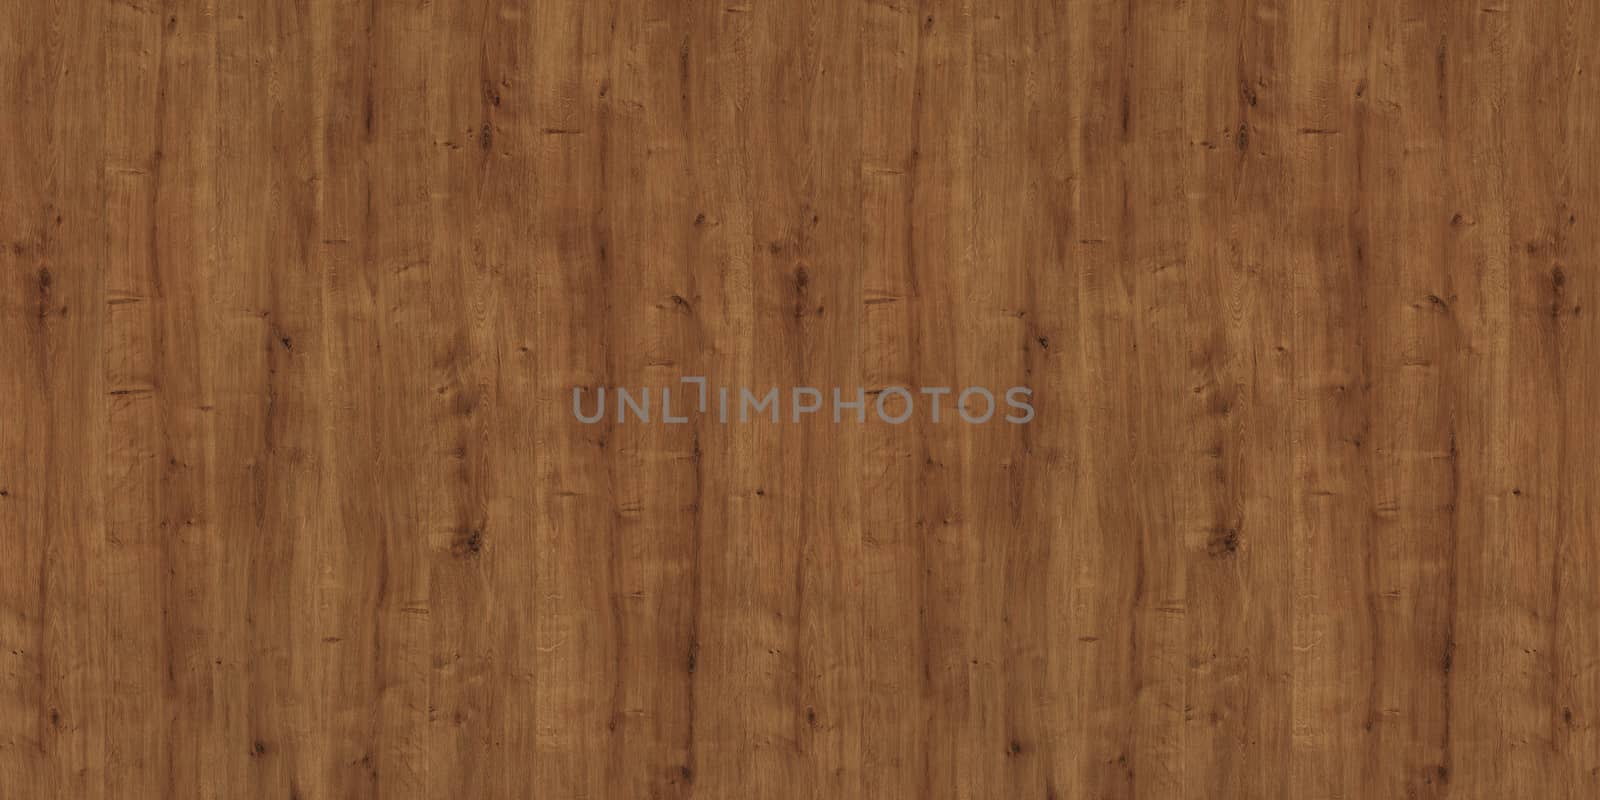 grunge wood pattern texture background, wooden table by ivo_13